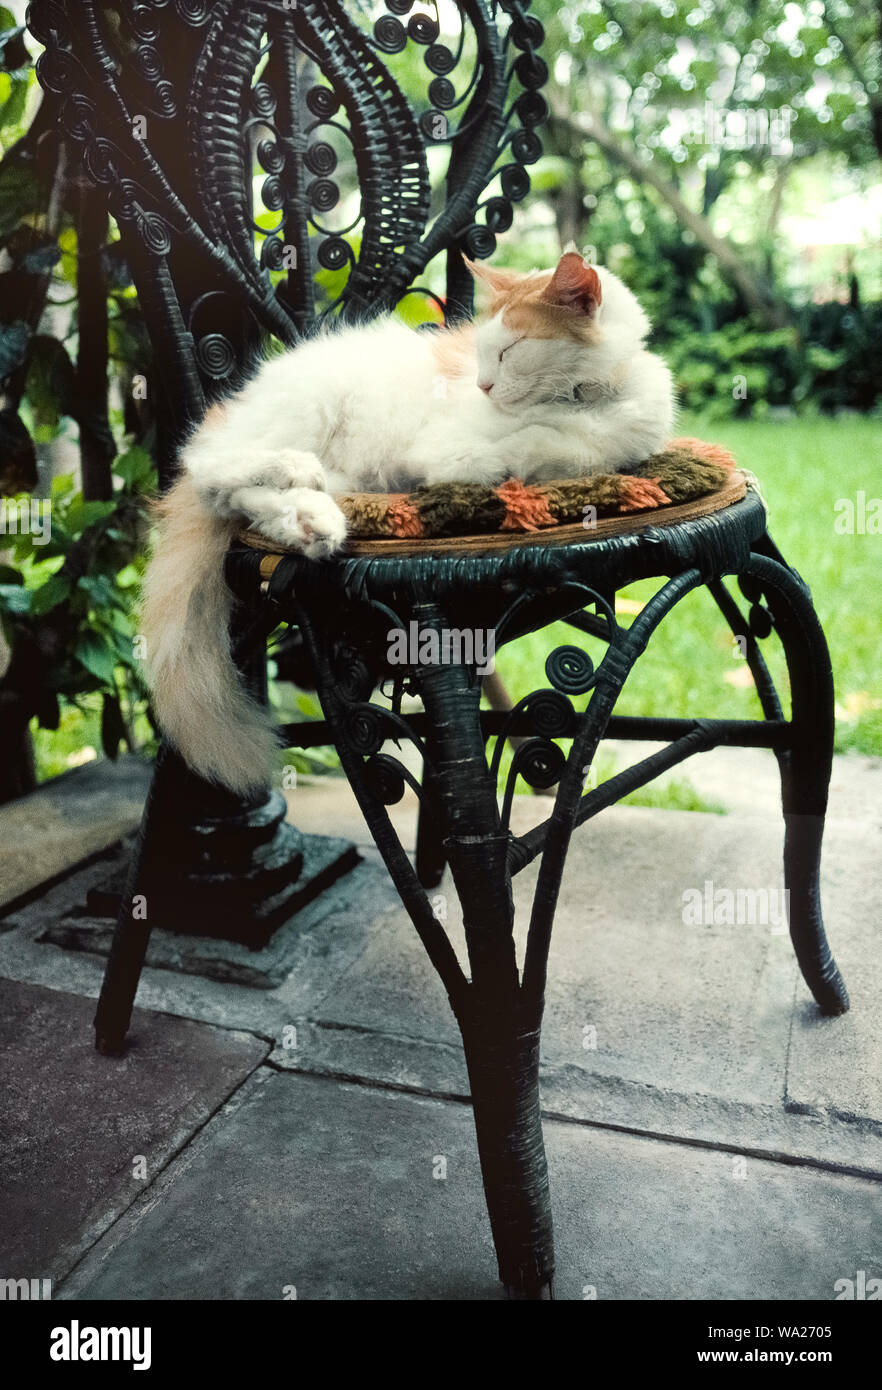 This sleepy cat resting outdoors on an old rattan chair is one of dozens of felines roaming the residence of famed author Ernest Hemingway who lived from 1931-39 at 907 Whitehead Street in Key West in the Florida Keys, Florida, USA. Many of these descendants of Hemingway's furry pets are polydactyl cats that have six toes instead of the usual five toes on their front paws and four toes on the back paws. These unusual animals can be seen by visitors at the privately-owned Hemingway House, which was built in 1851 and now is a U.S. National Historic Landmark open daily for tours. Stock Photo